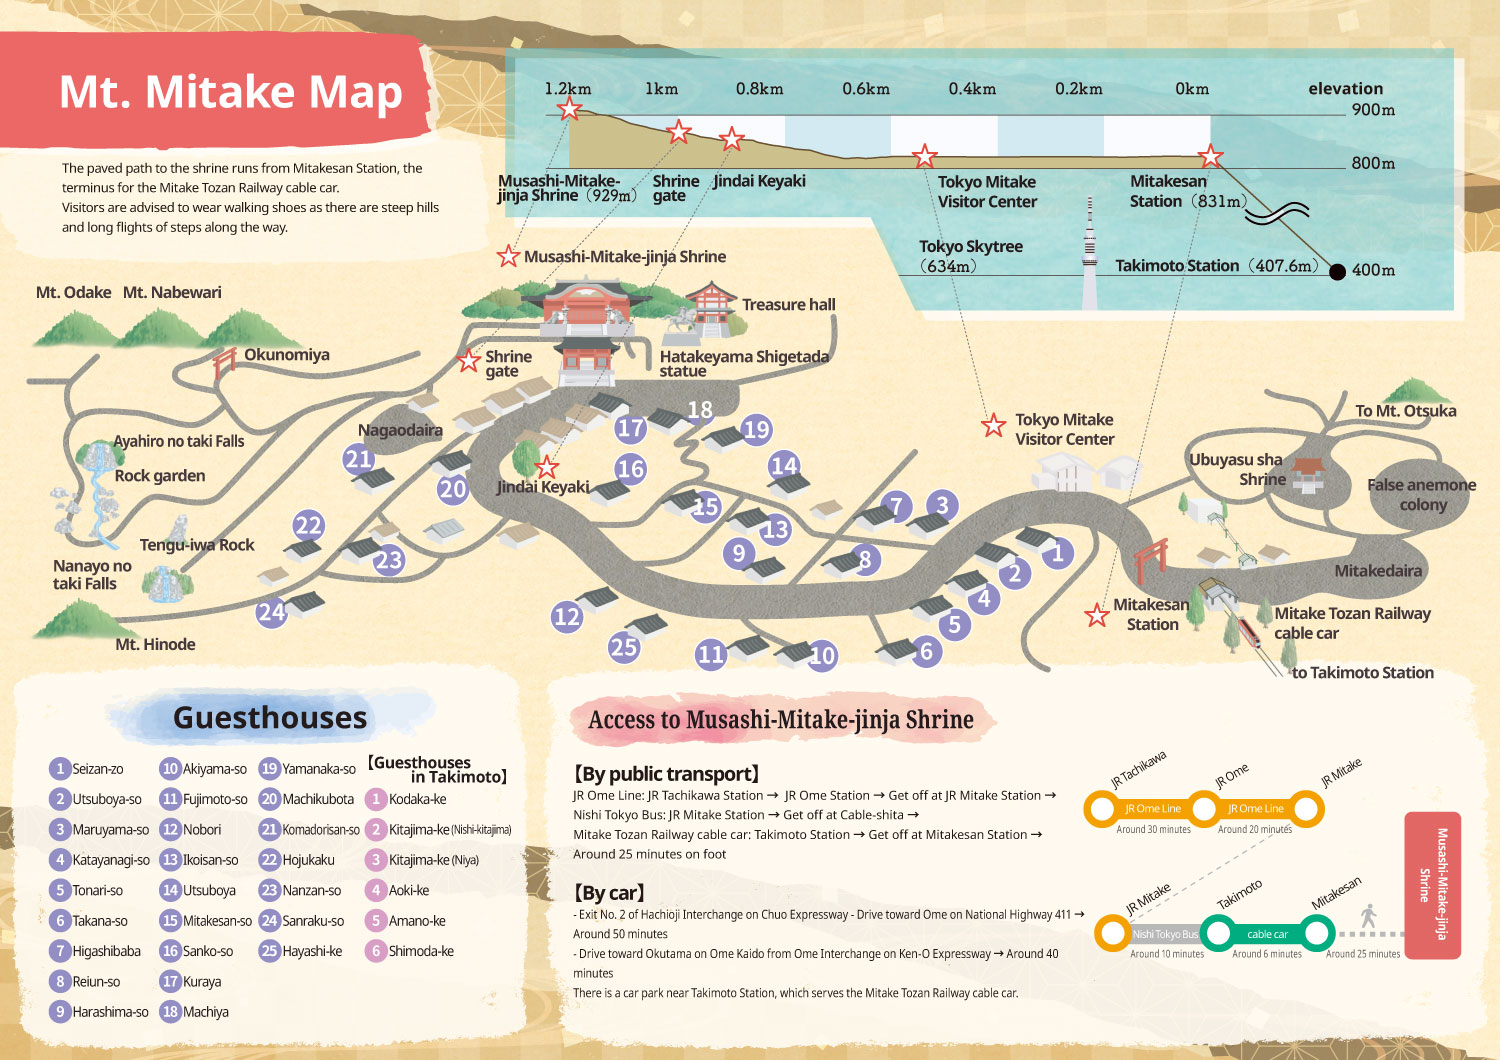 Mt. Mitake Map [The paved path to the shrine runs from Mitakesan Station, the terminus for the Mitake Tozan Railway cable car. Visitors are advised to wear walking shoes as there are steep hills and long flights of steps along the way.